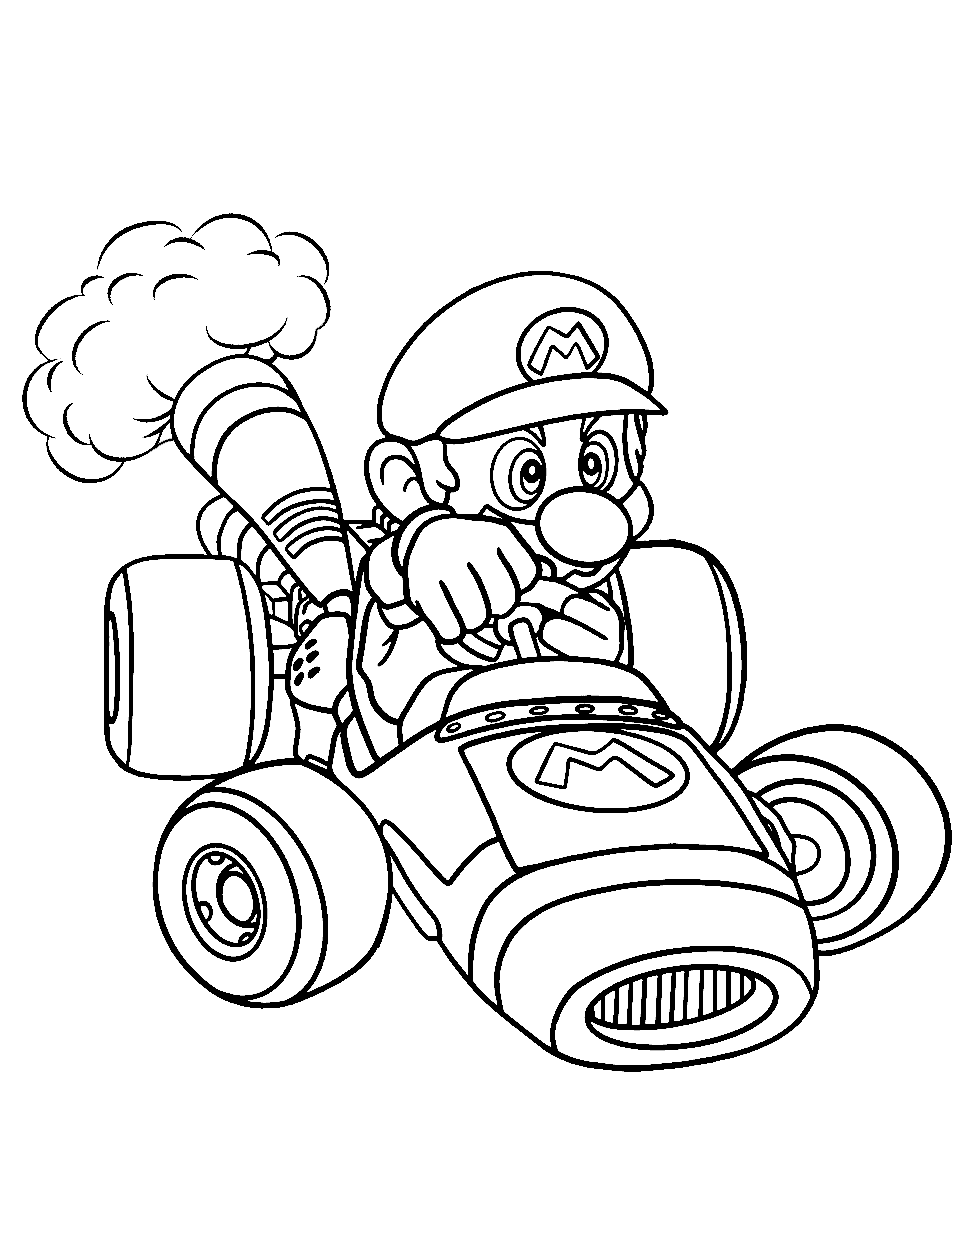 Mario Kart Madness Race Car Coloring Page - A kart from the Mario universe, racing with Mario inside.